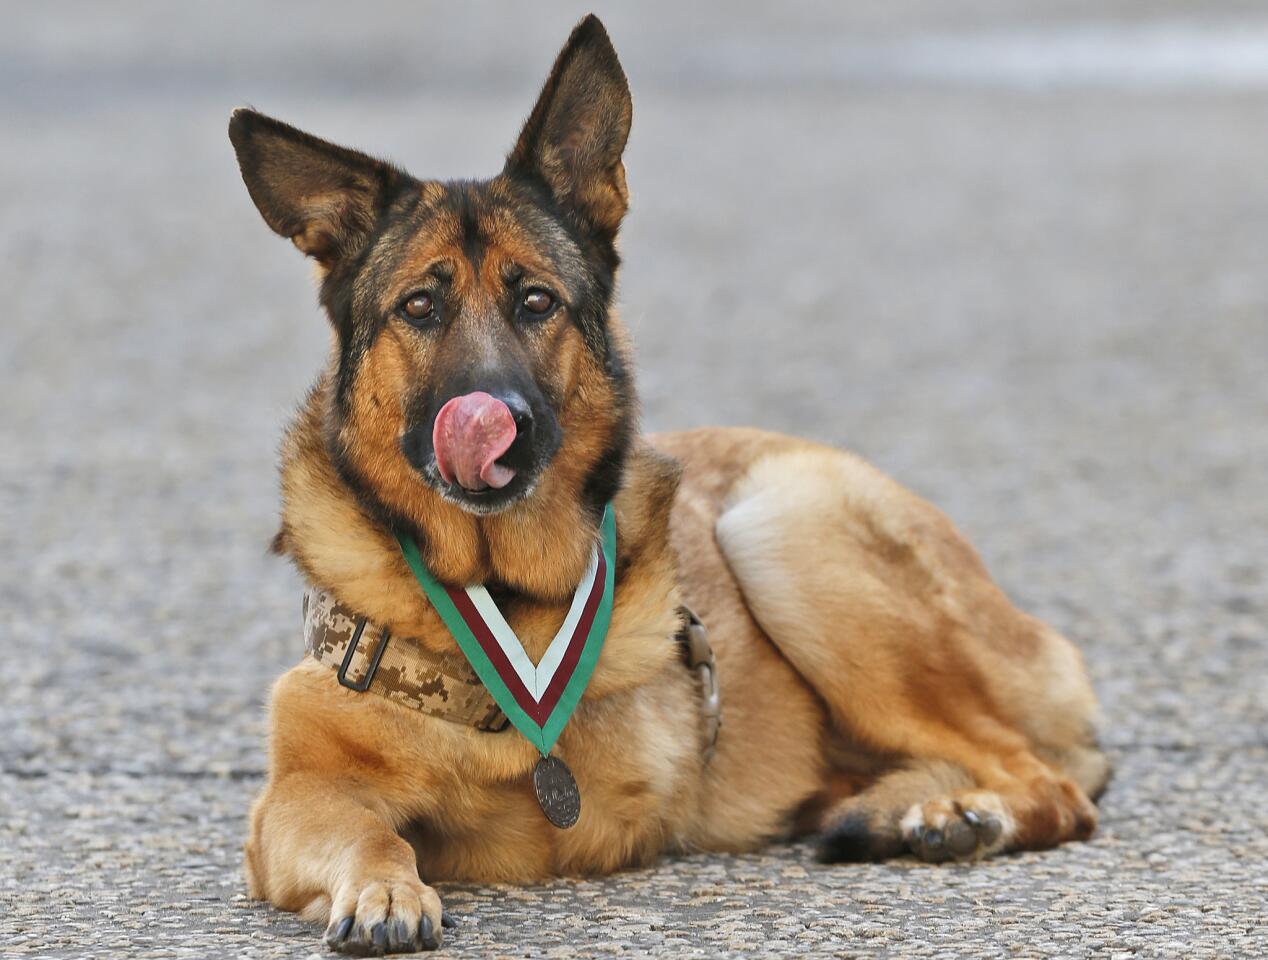 Lucca rests after receiving the Dickin Medal, Britain's highest award for valor by a military animal and equivalent to the Victoria Cross, in London on April 5. She is the first U.S. military dog to receive the honor. Now 12, she lost her leg in a bomb blast in March 2012, in Helmand Province, Afghanistan.